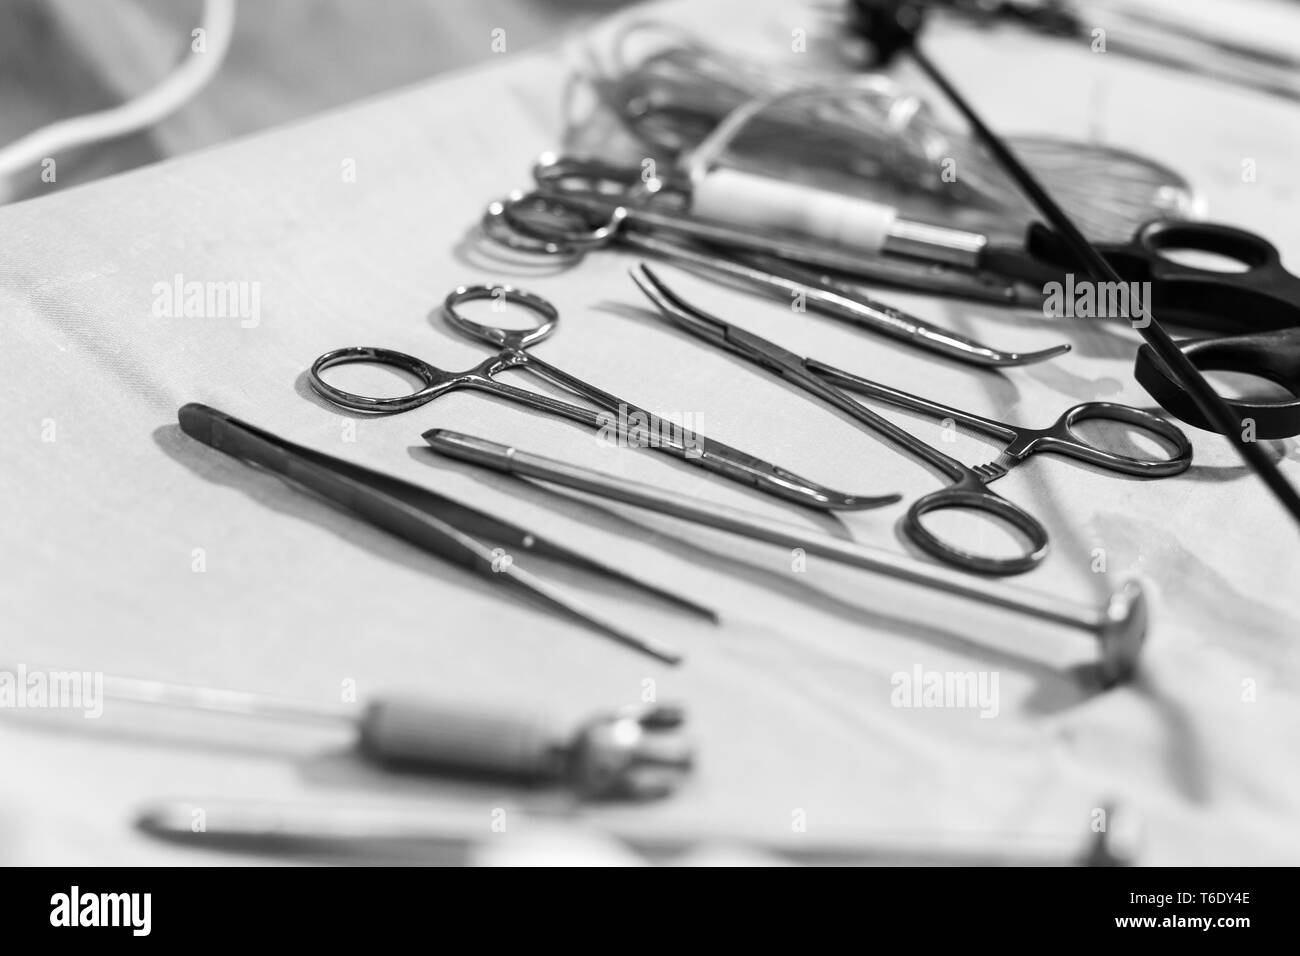 metal surgical clamps on white sterile table. Stock Photo